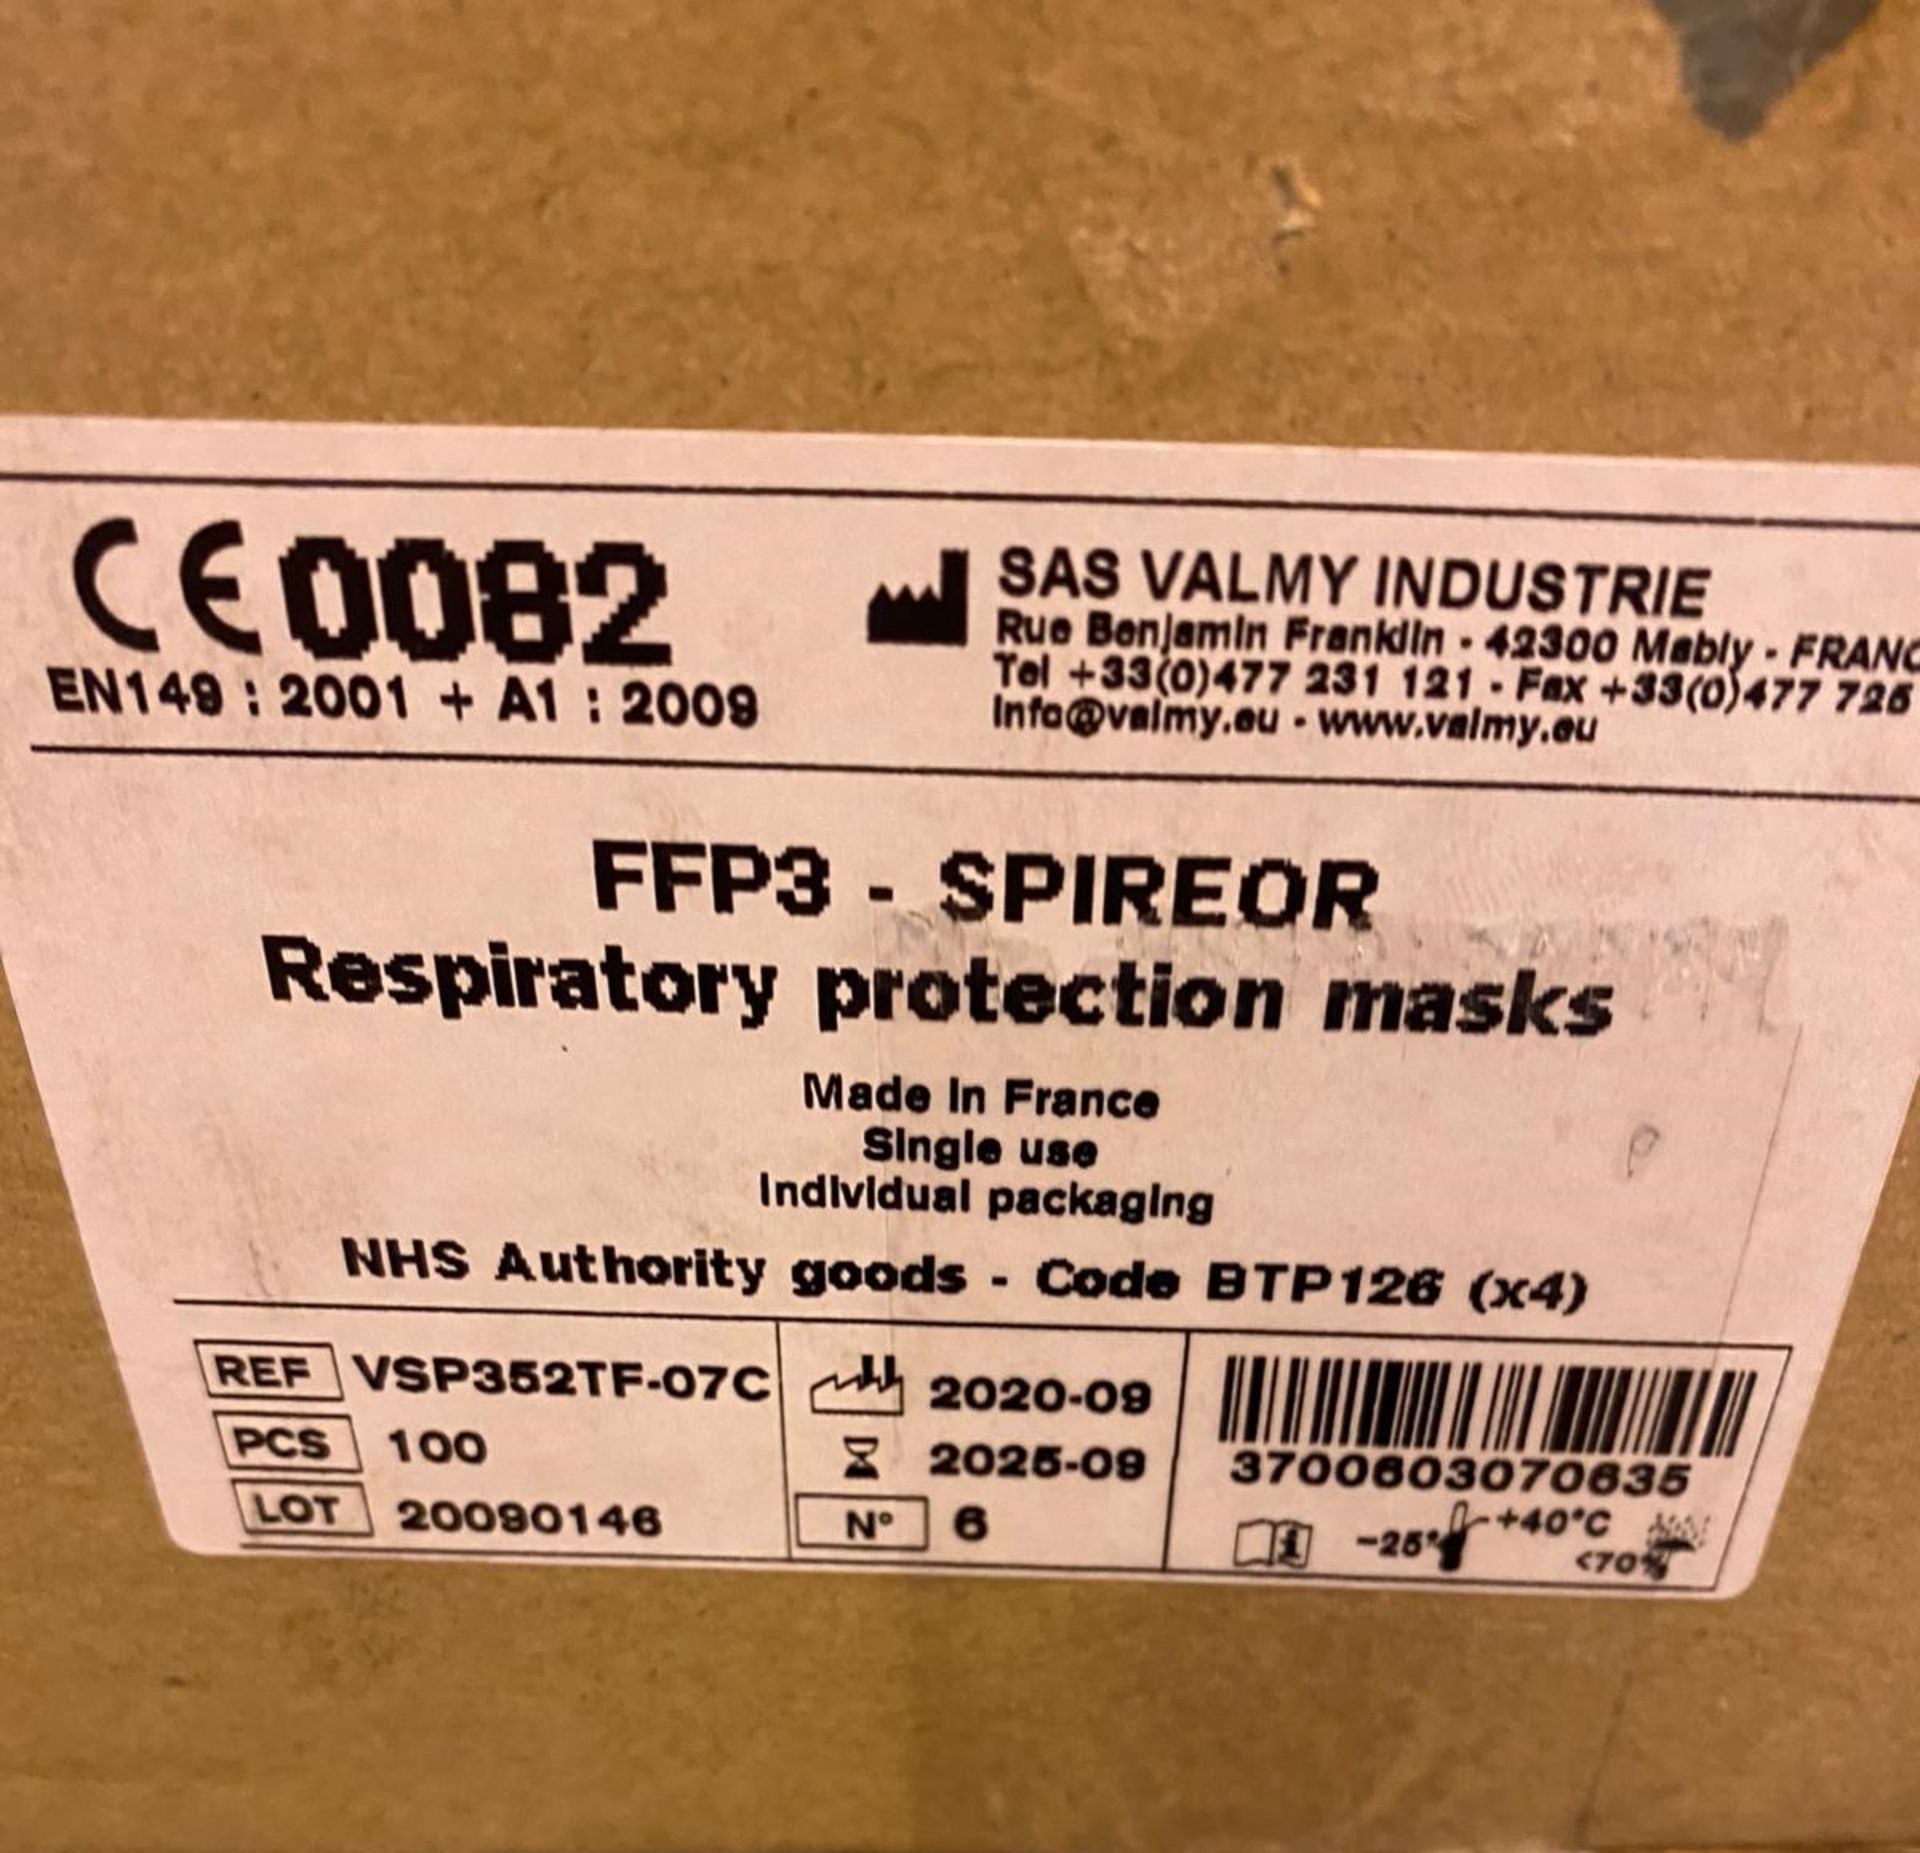 1,000 x Valmy Spireor Resparitory FFP3 Face Masks - NHS Approved - Stock Code VSP352TF-07C - New - Image 5 of 7